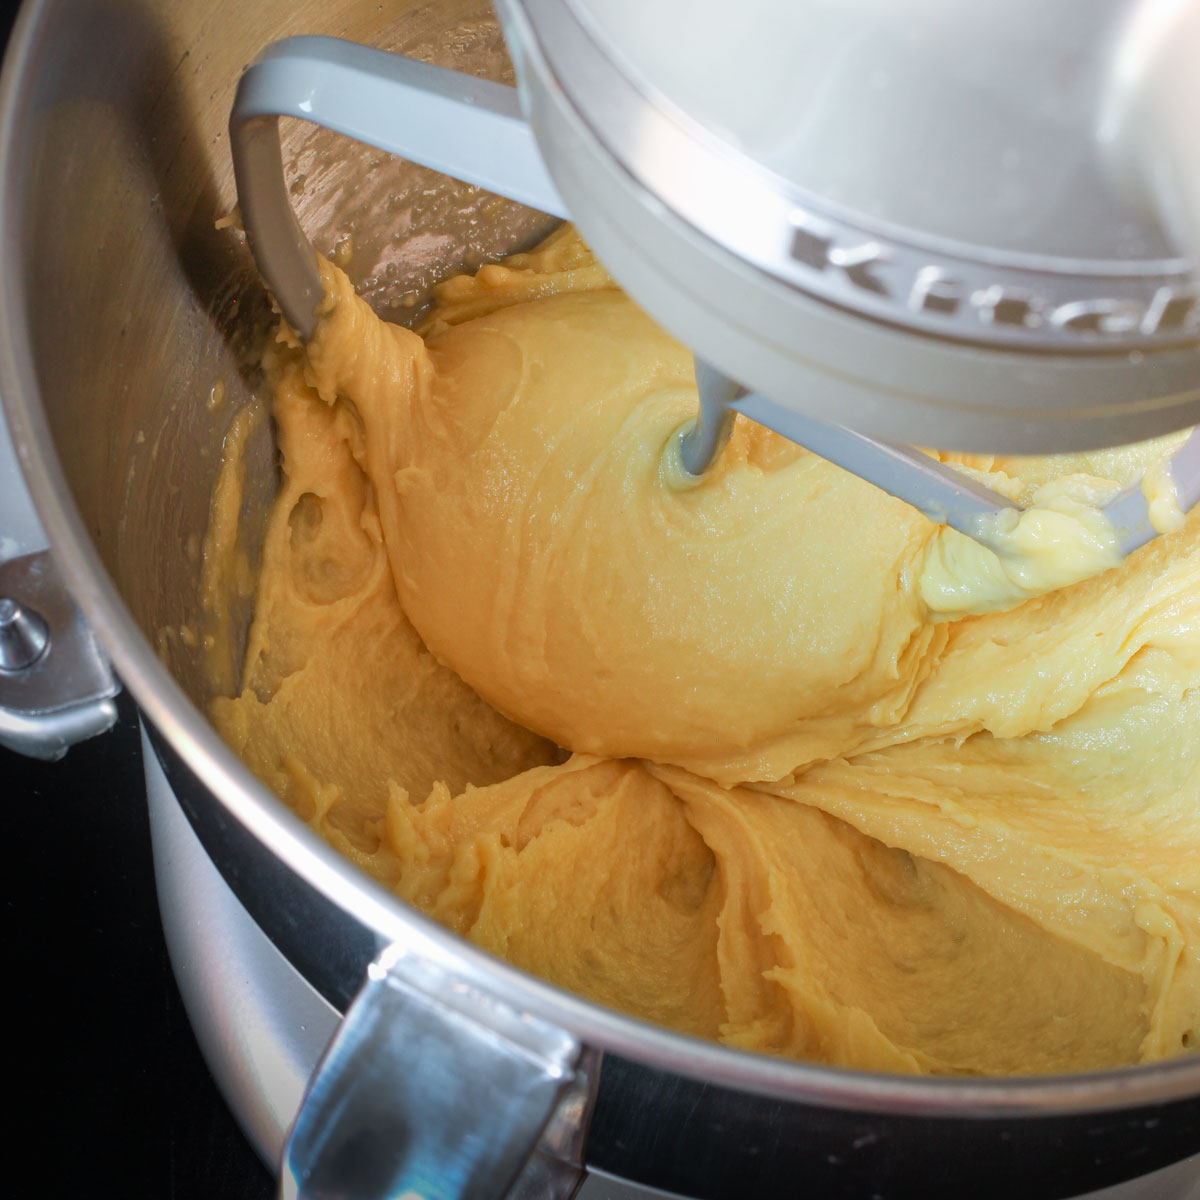 after all the eggs have been beaten in, the batter looks smooth and creamy.